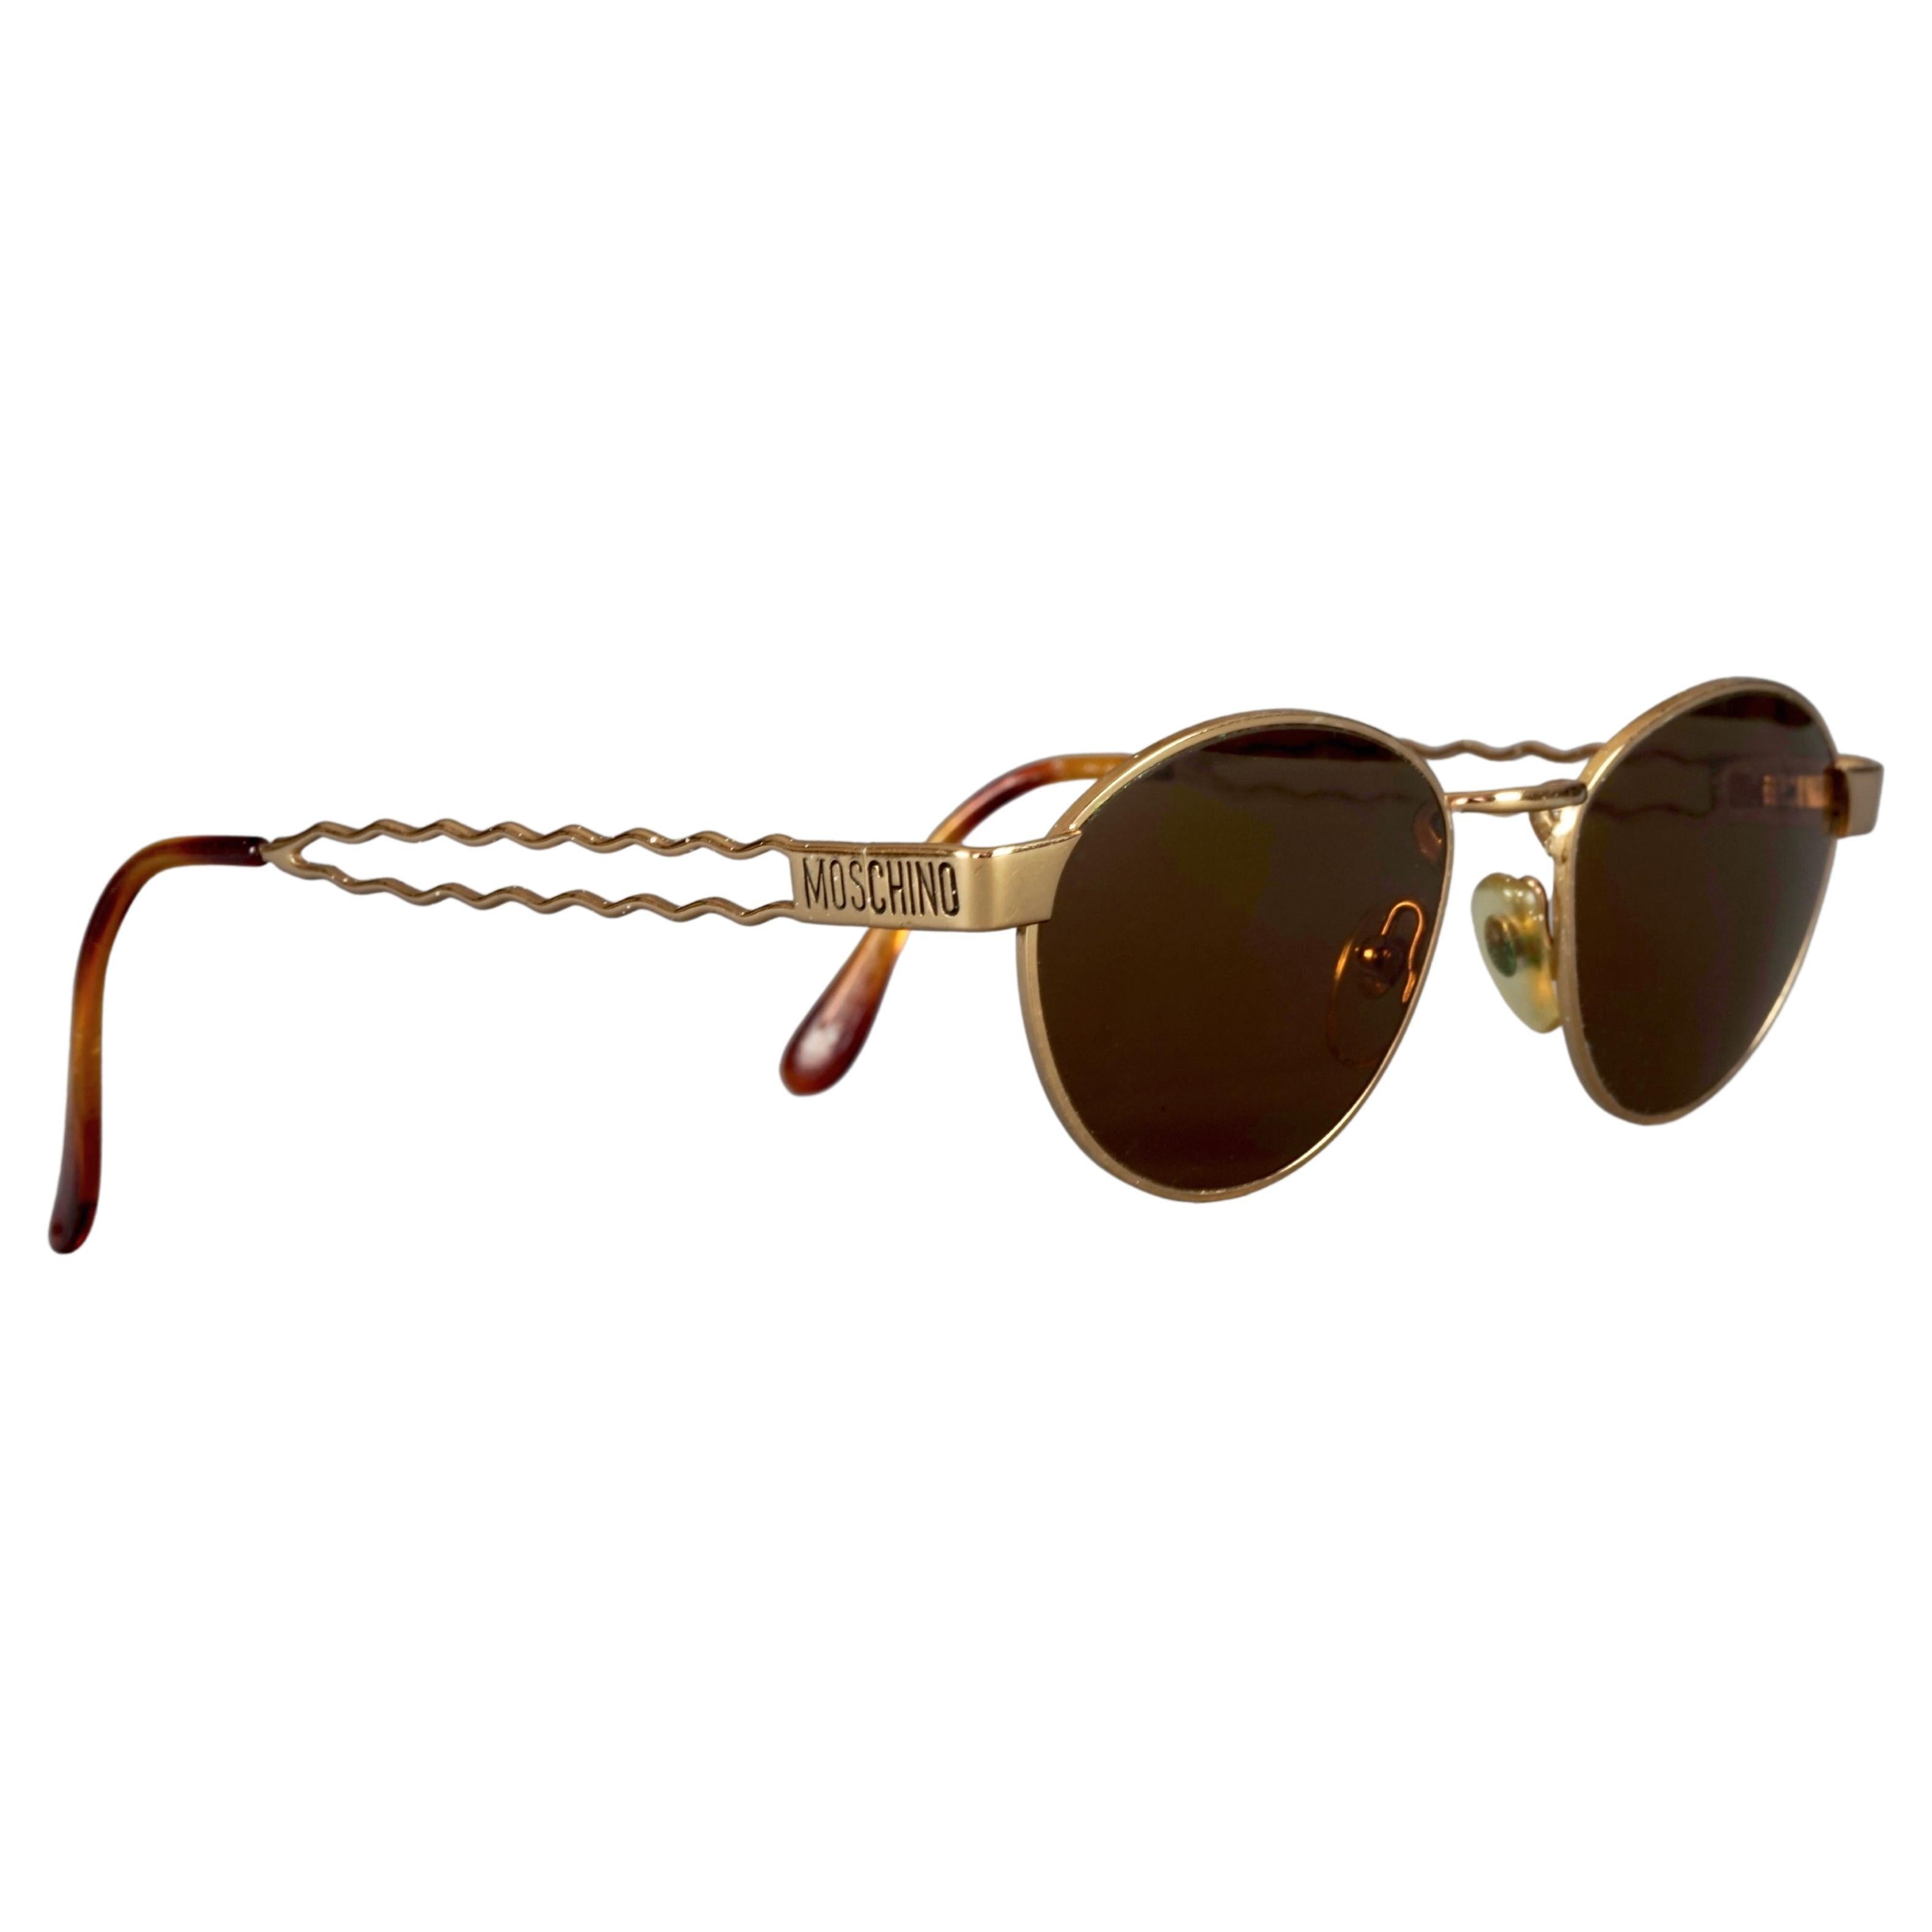 Vintage MOSCHINO Bobby Hair Pin Novelty Sunglasses For Sale